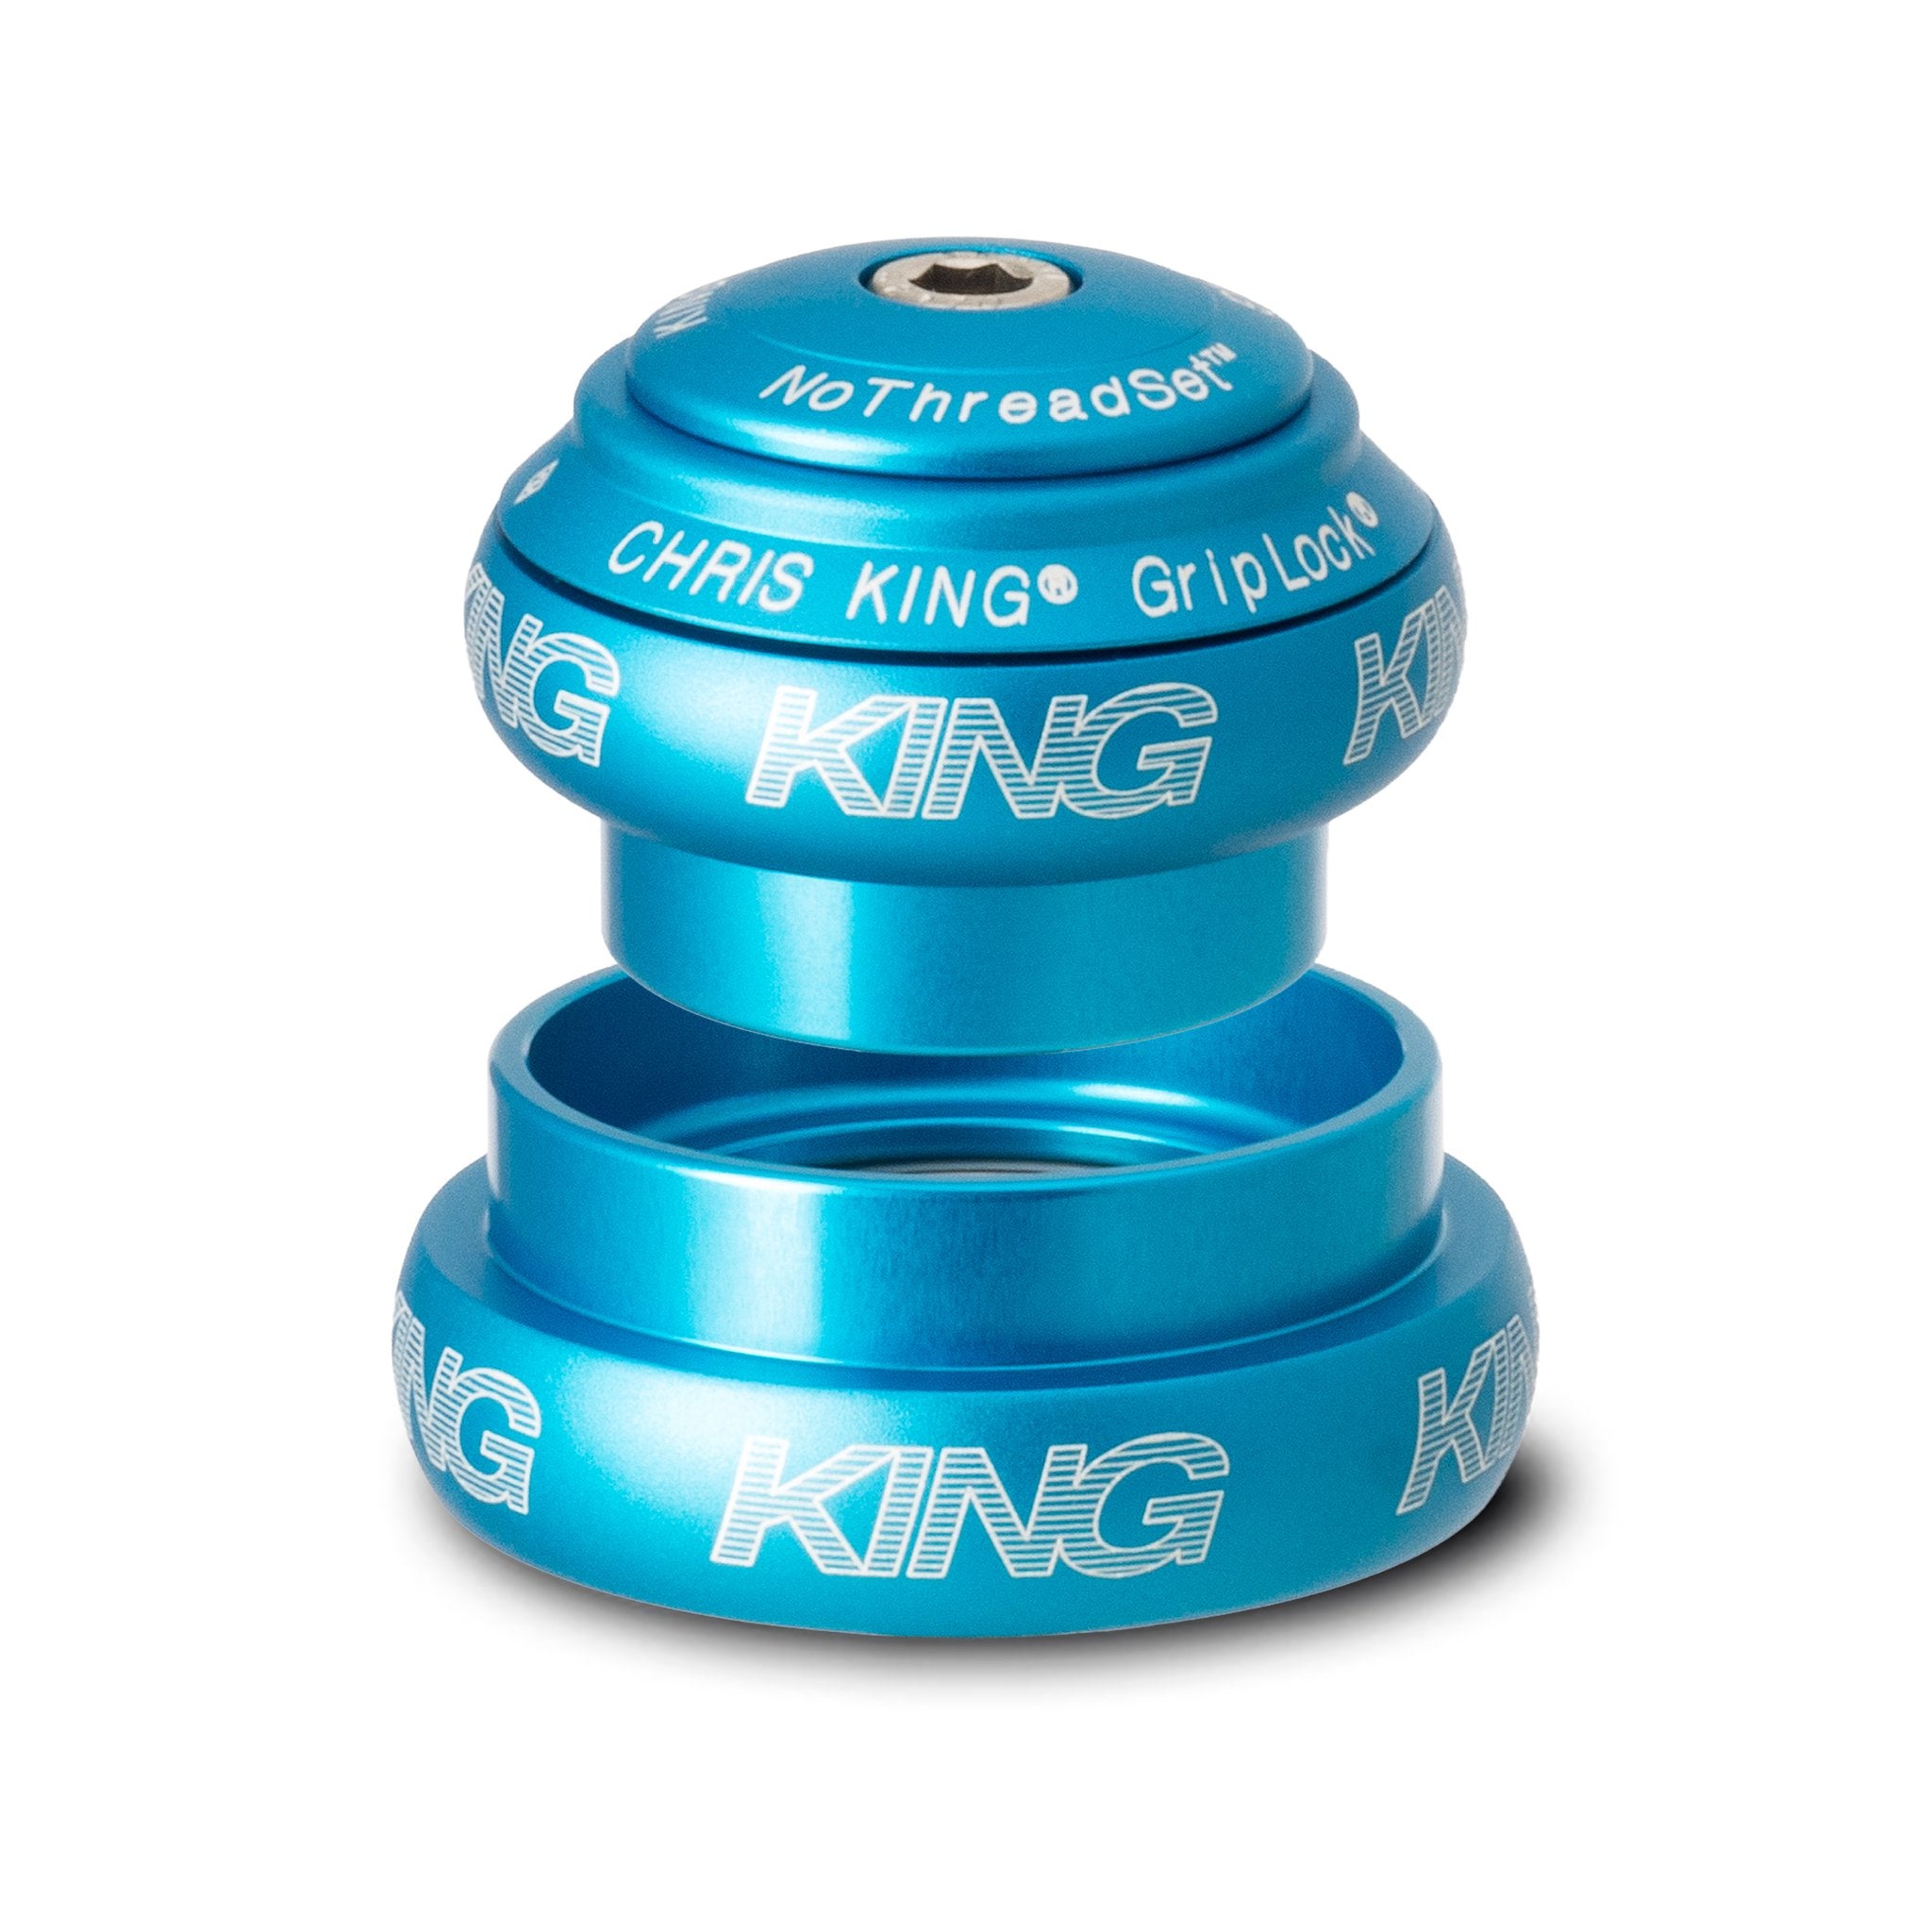 CHRIS KING NoThreadSet Tapered 1-1/4"